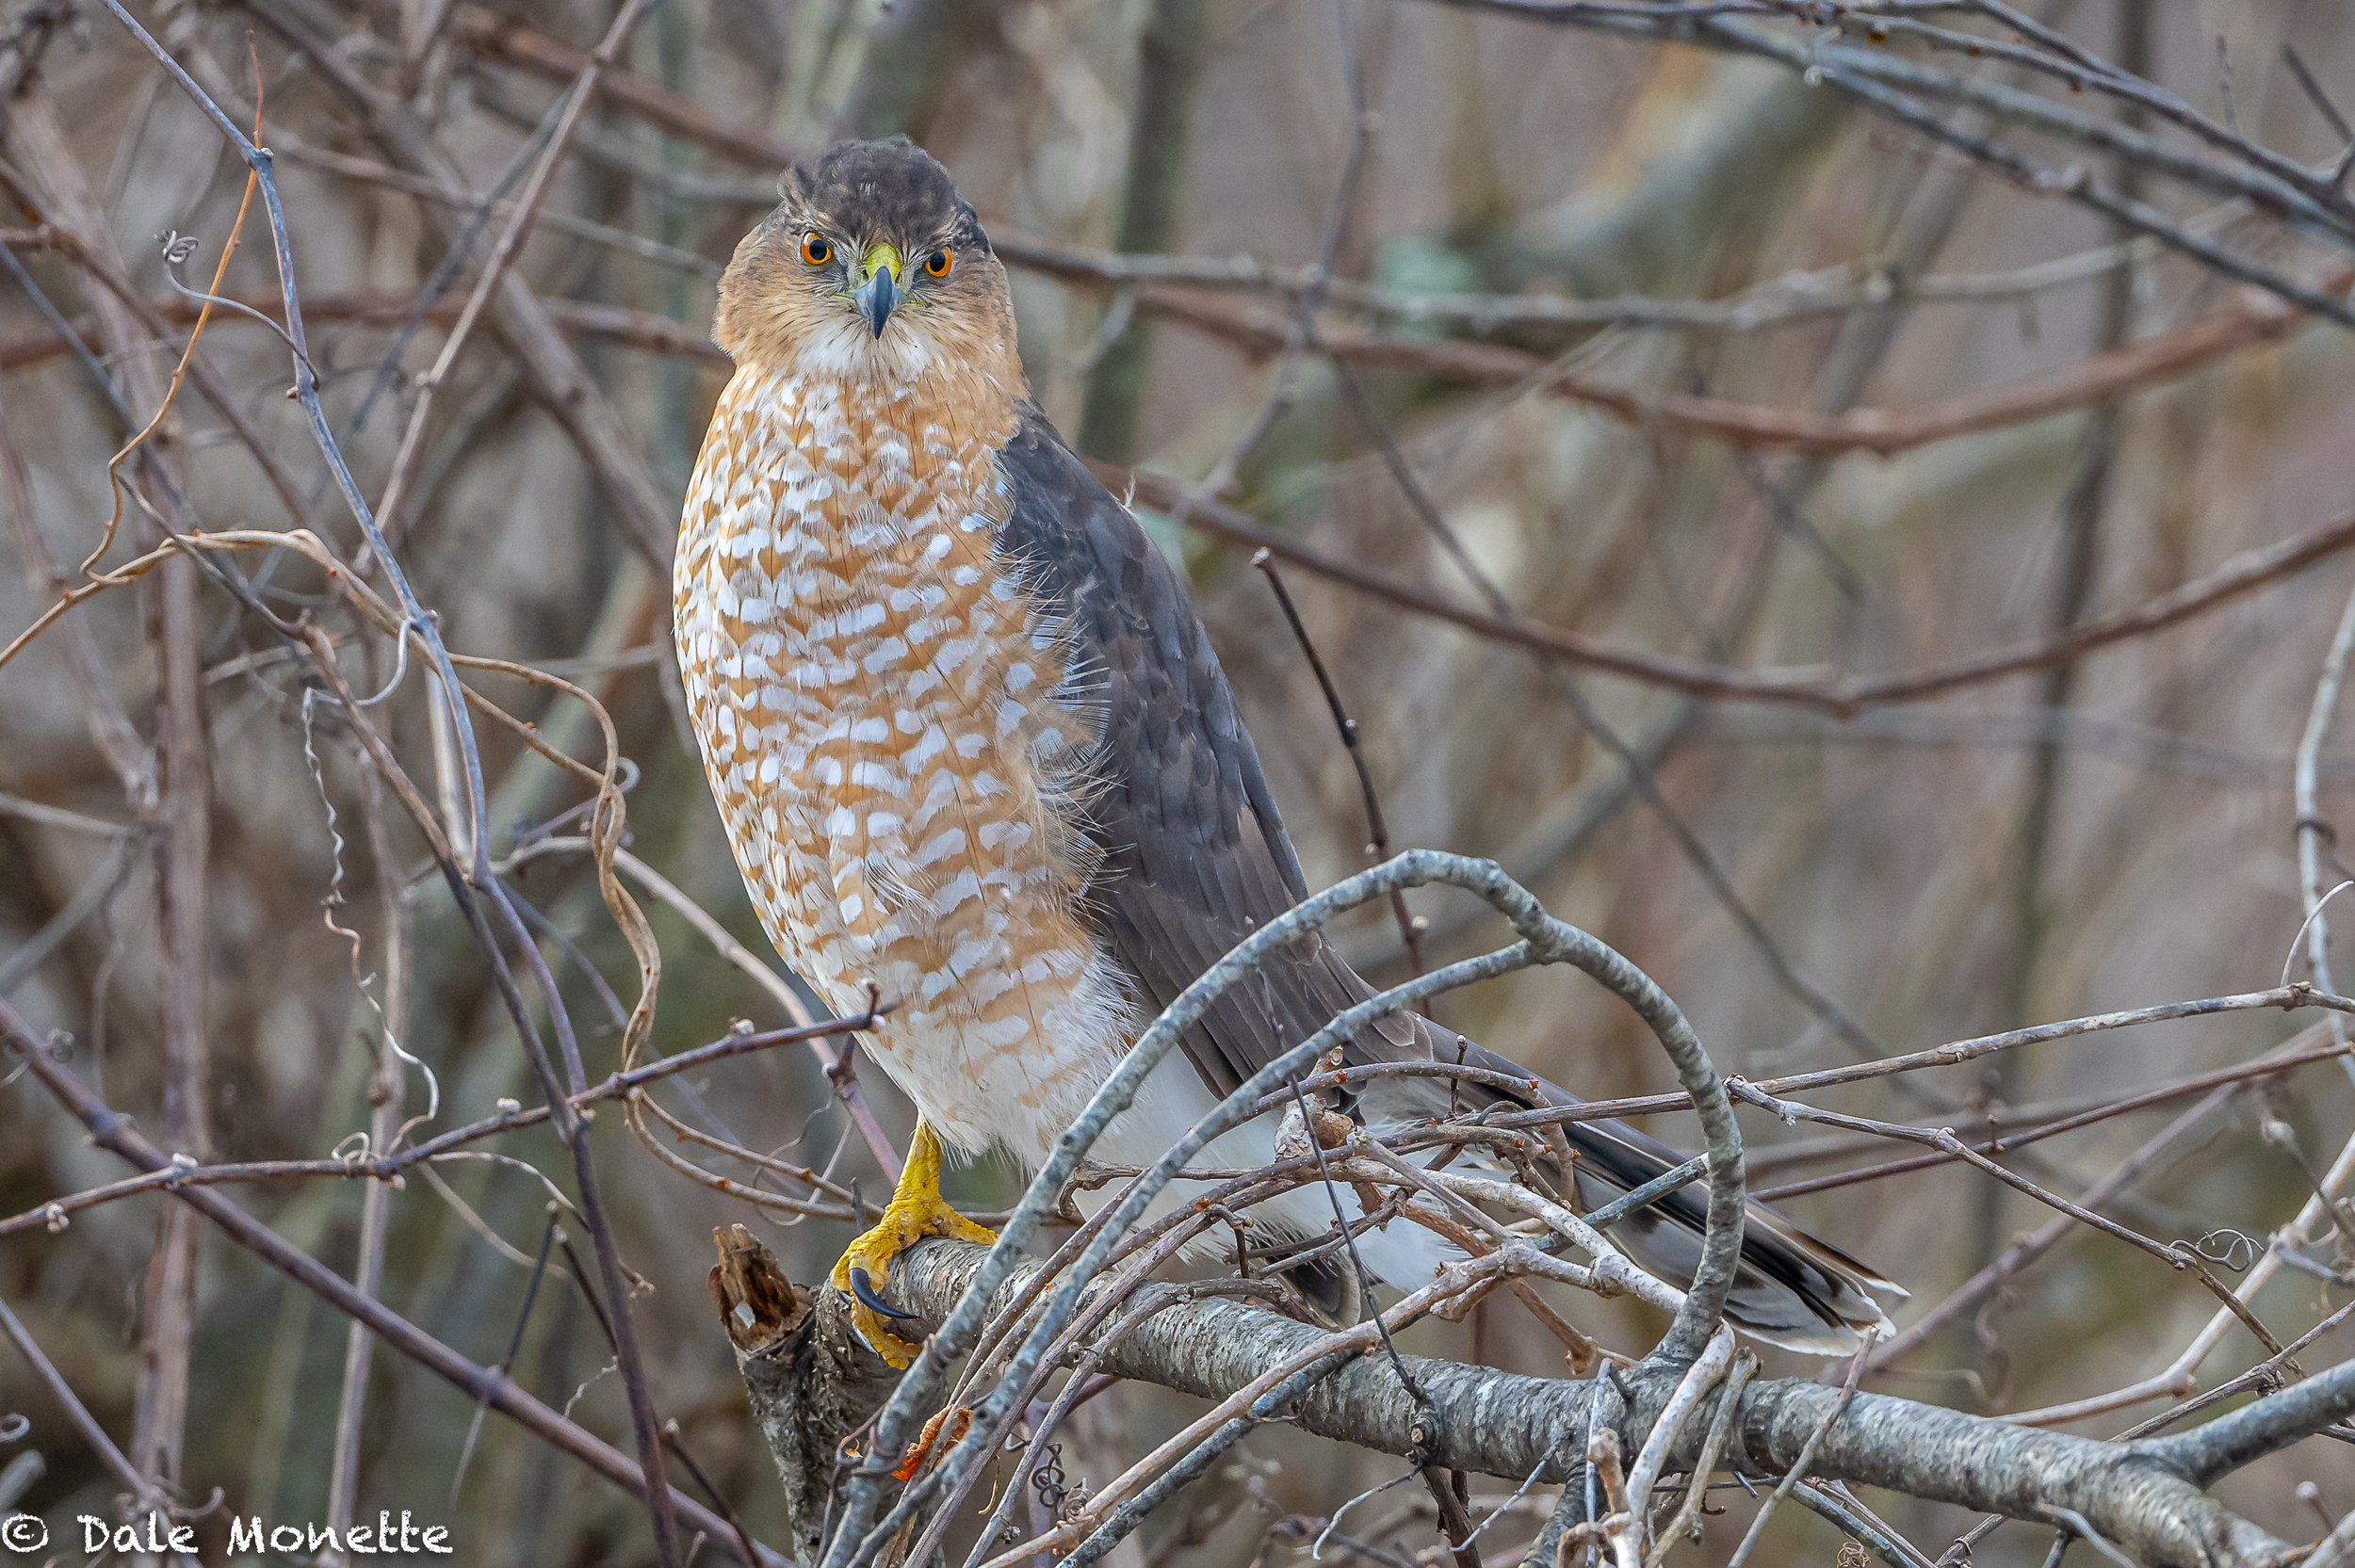   I tried my new toy on this beautiful Coopers Hawk hunting along the edge of a stream in a thicket.  My toy is a new Nikon Z 9 camera… and I love it !    